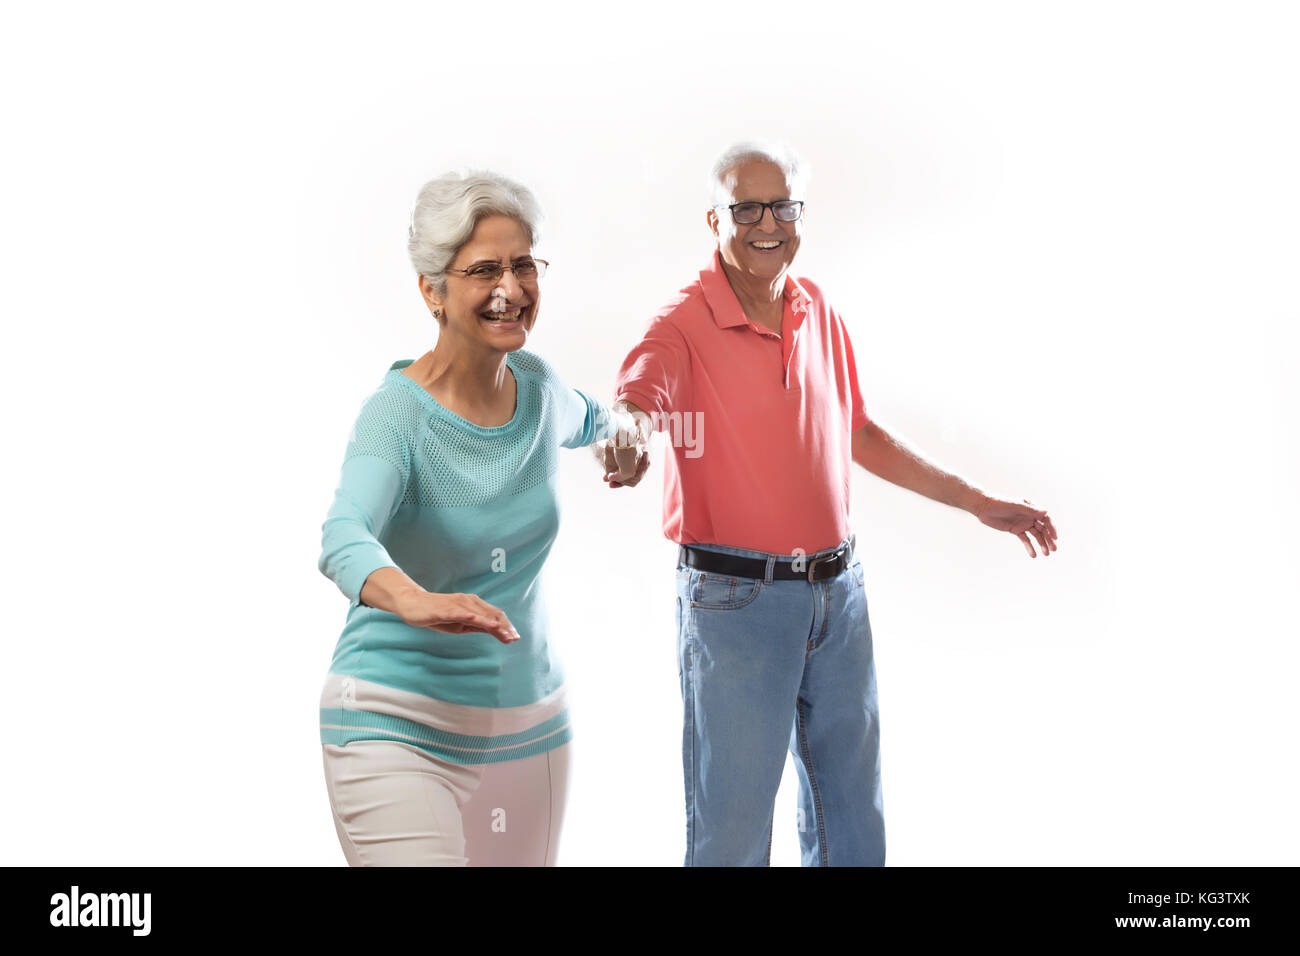 Happy senior couple holding hands and dancing Banque D'Images